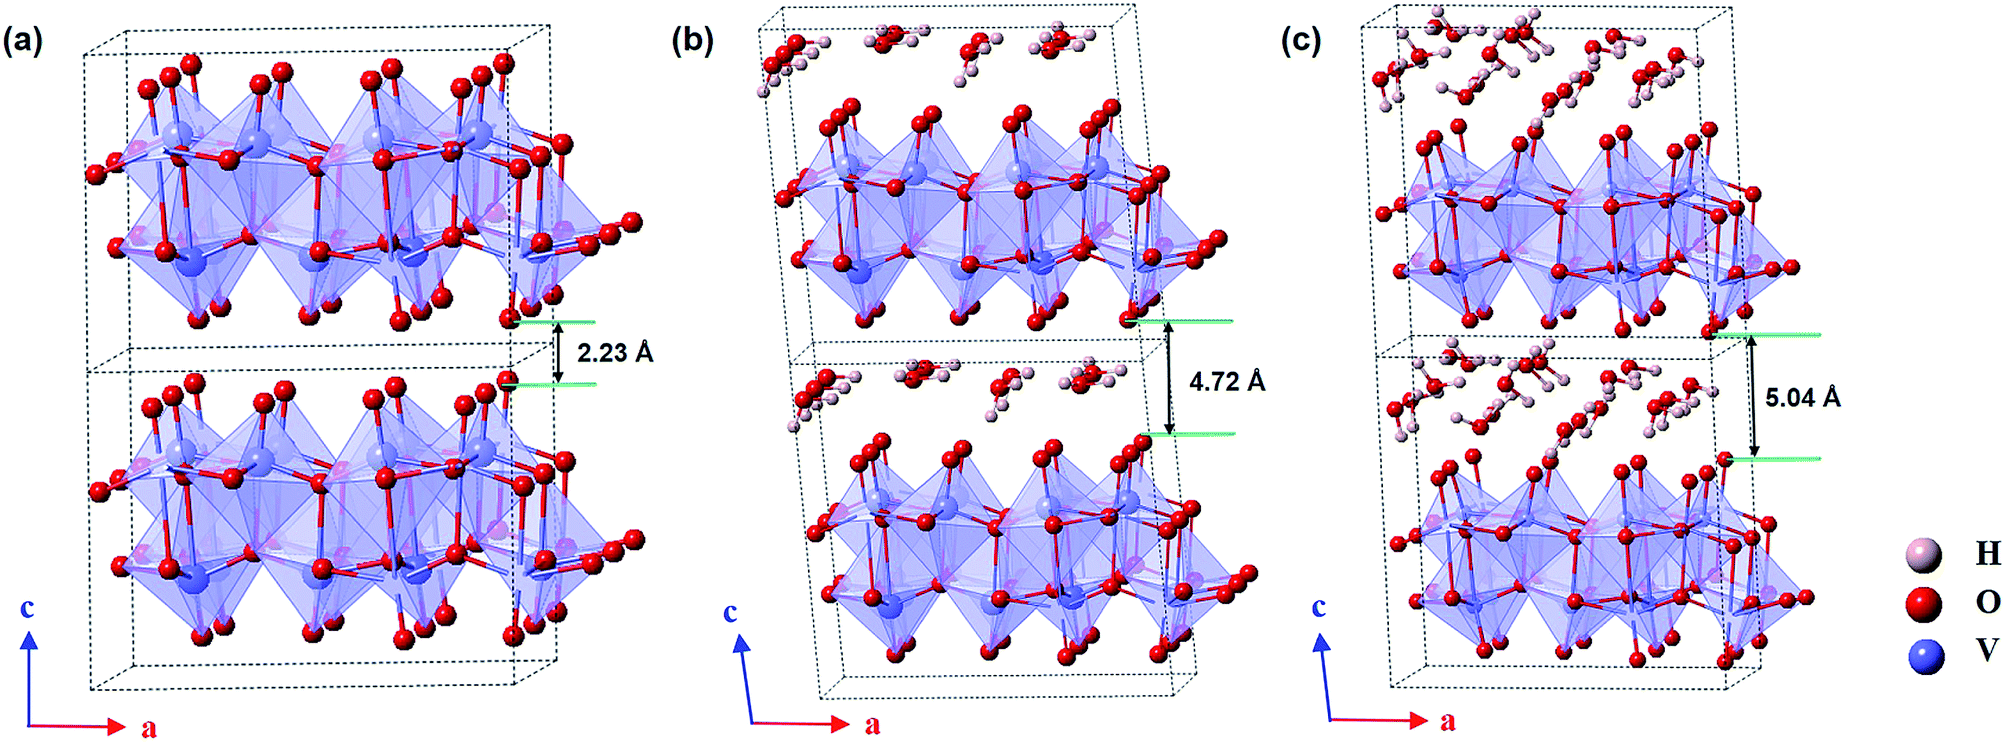 Unraveling The Role Of Structural Water In Bilayer V2o5 During Zn2 Intercalation Insights From Dft Calculations Journal Of Materials Chemistry A Rsc Publishing